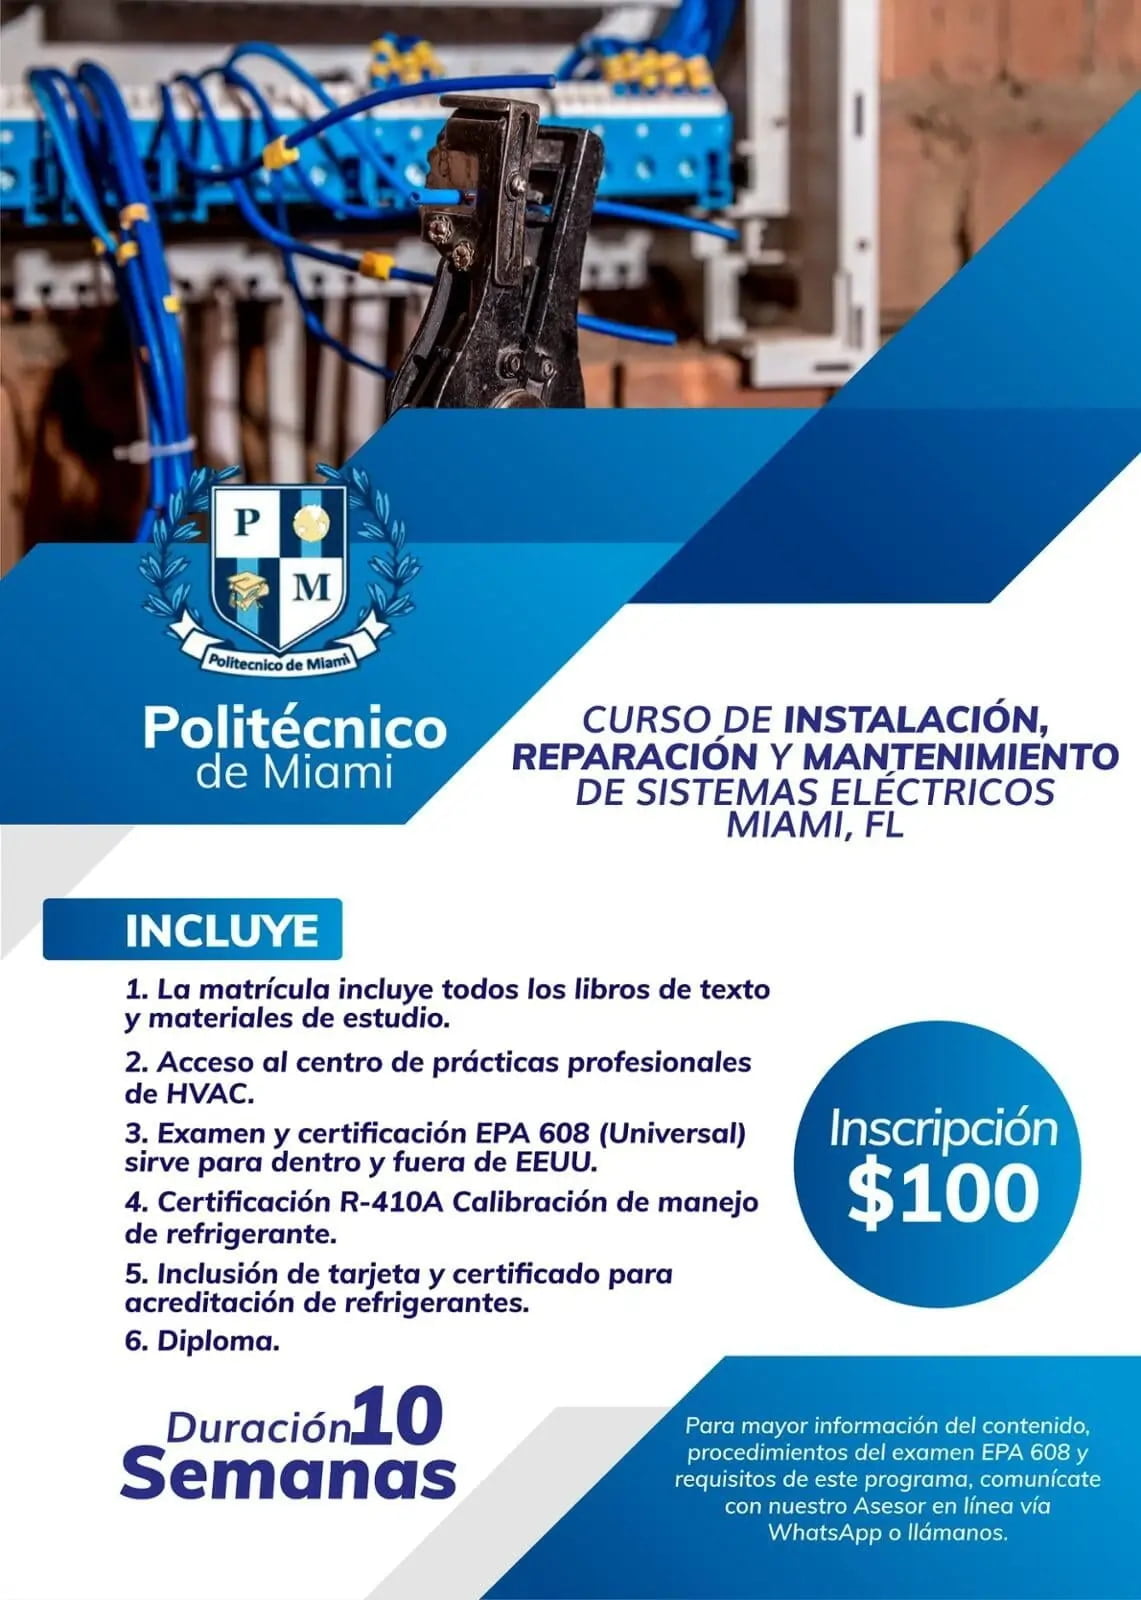 "Flyer for the 'Politécnico de Miami' featuring a $100 enrollment fee for a 10-week course on HVAC systems, including EPA 608 certification, R-410A refrigerant management calibration certification, professional practice center access, textbooks, and a diploma. Contact details for further information and enrollment are provided, inviting engagement through WhatsApp or phone call."